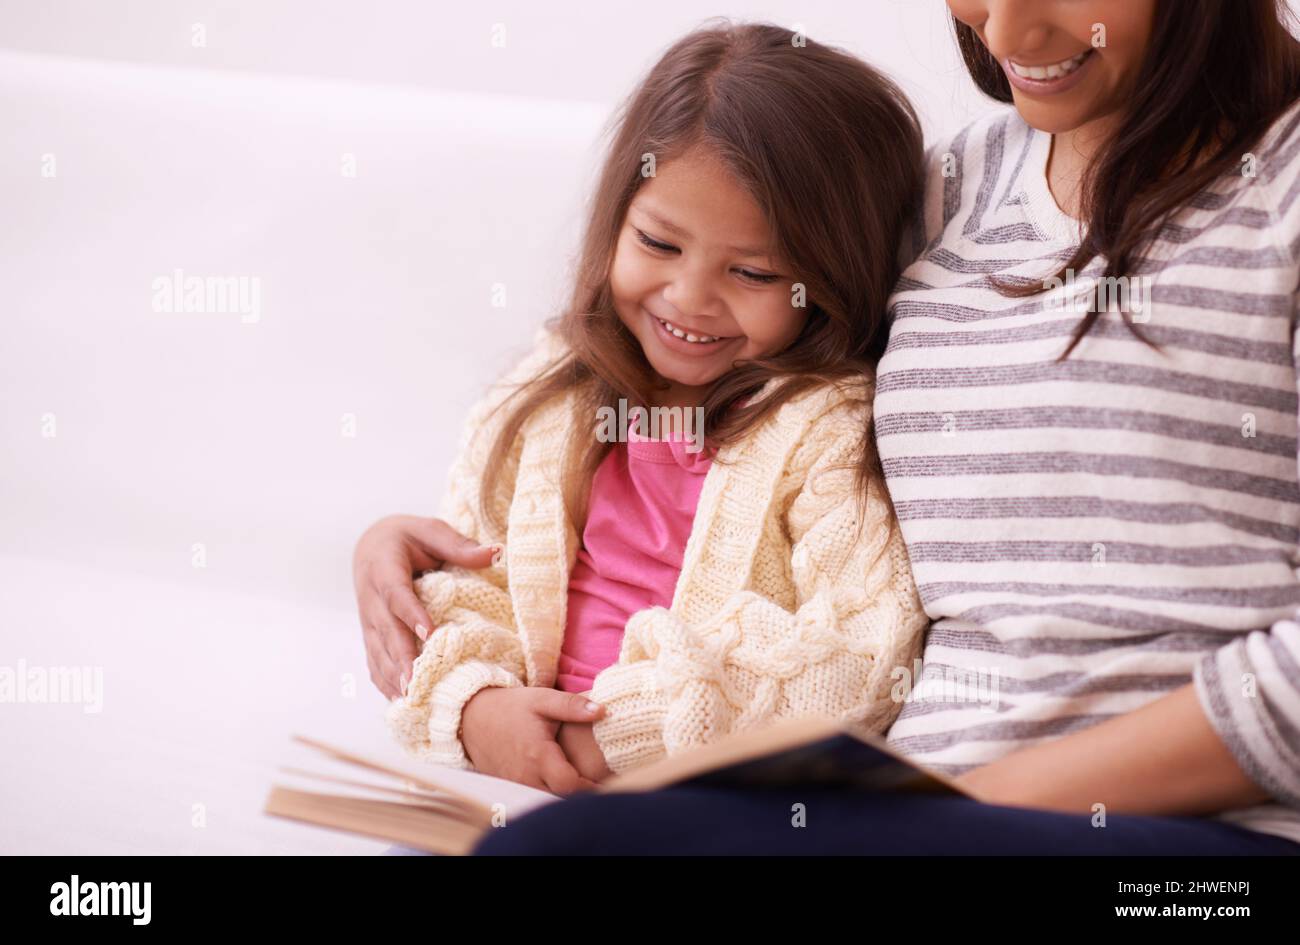 She loves fairytales. Cropped shot of a young mother reading to her daughter at home. Stock Photo